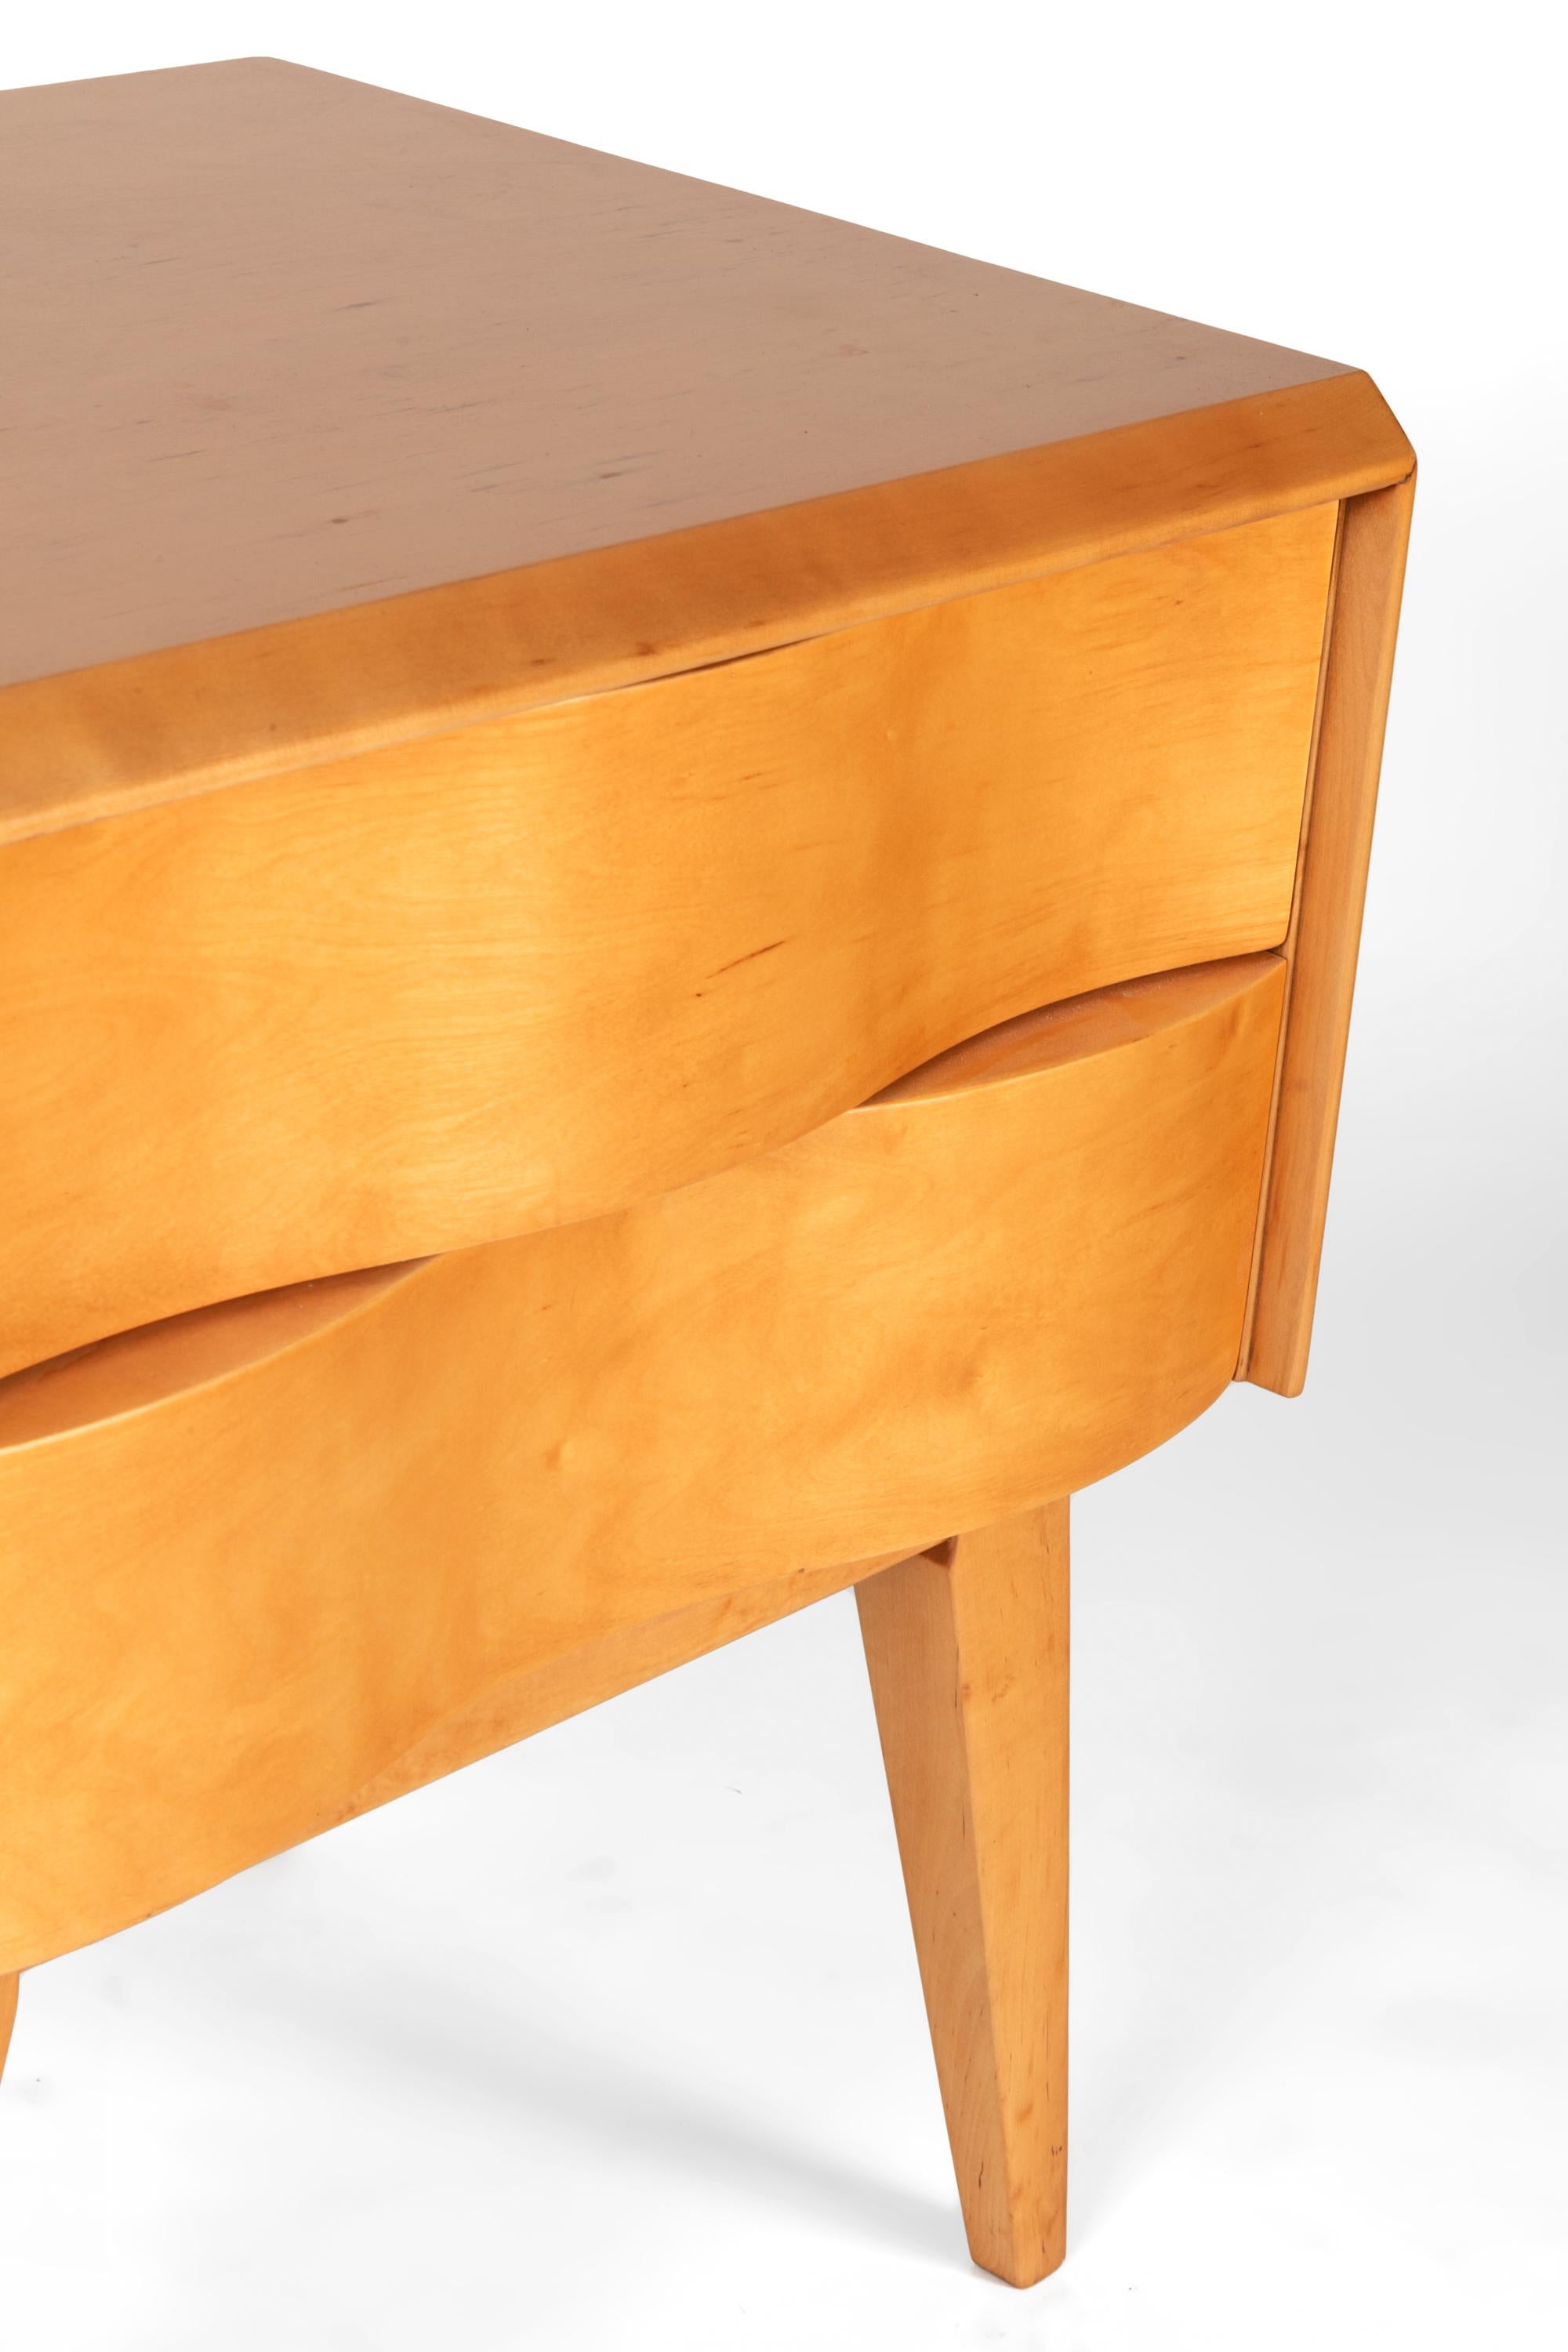 Birch Edmond Spence Wave Front Two-Drawer Nightstands or Side Tables, Sweden 1950s